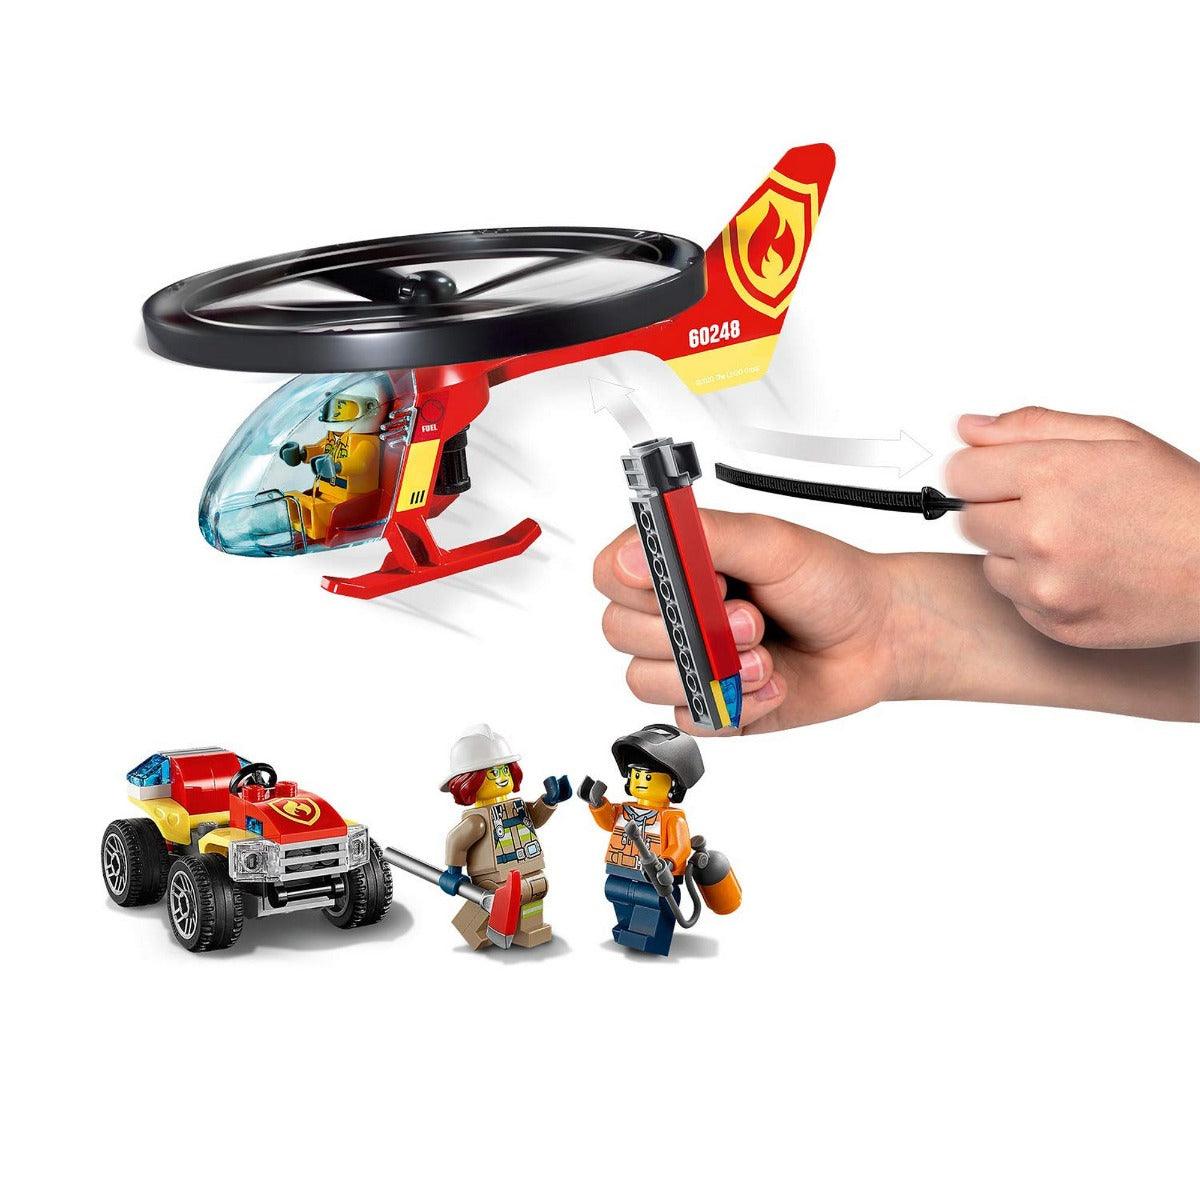 LEGO City Fire Helicopter Response